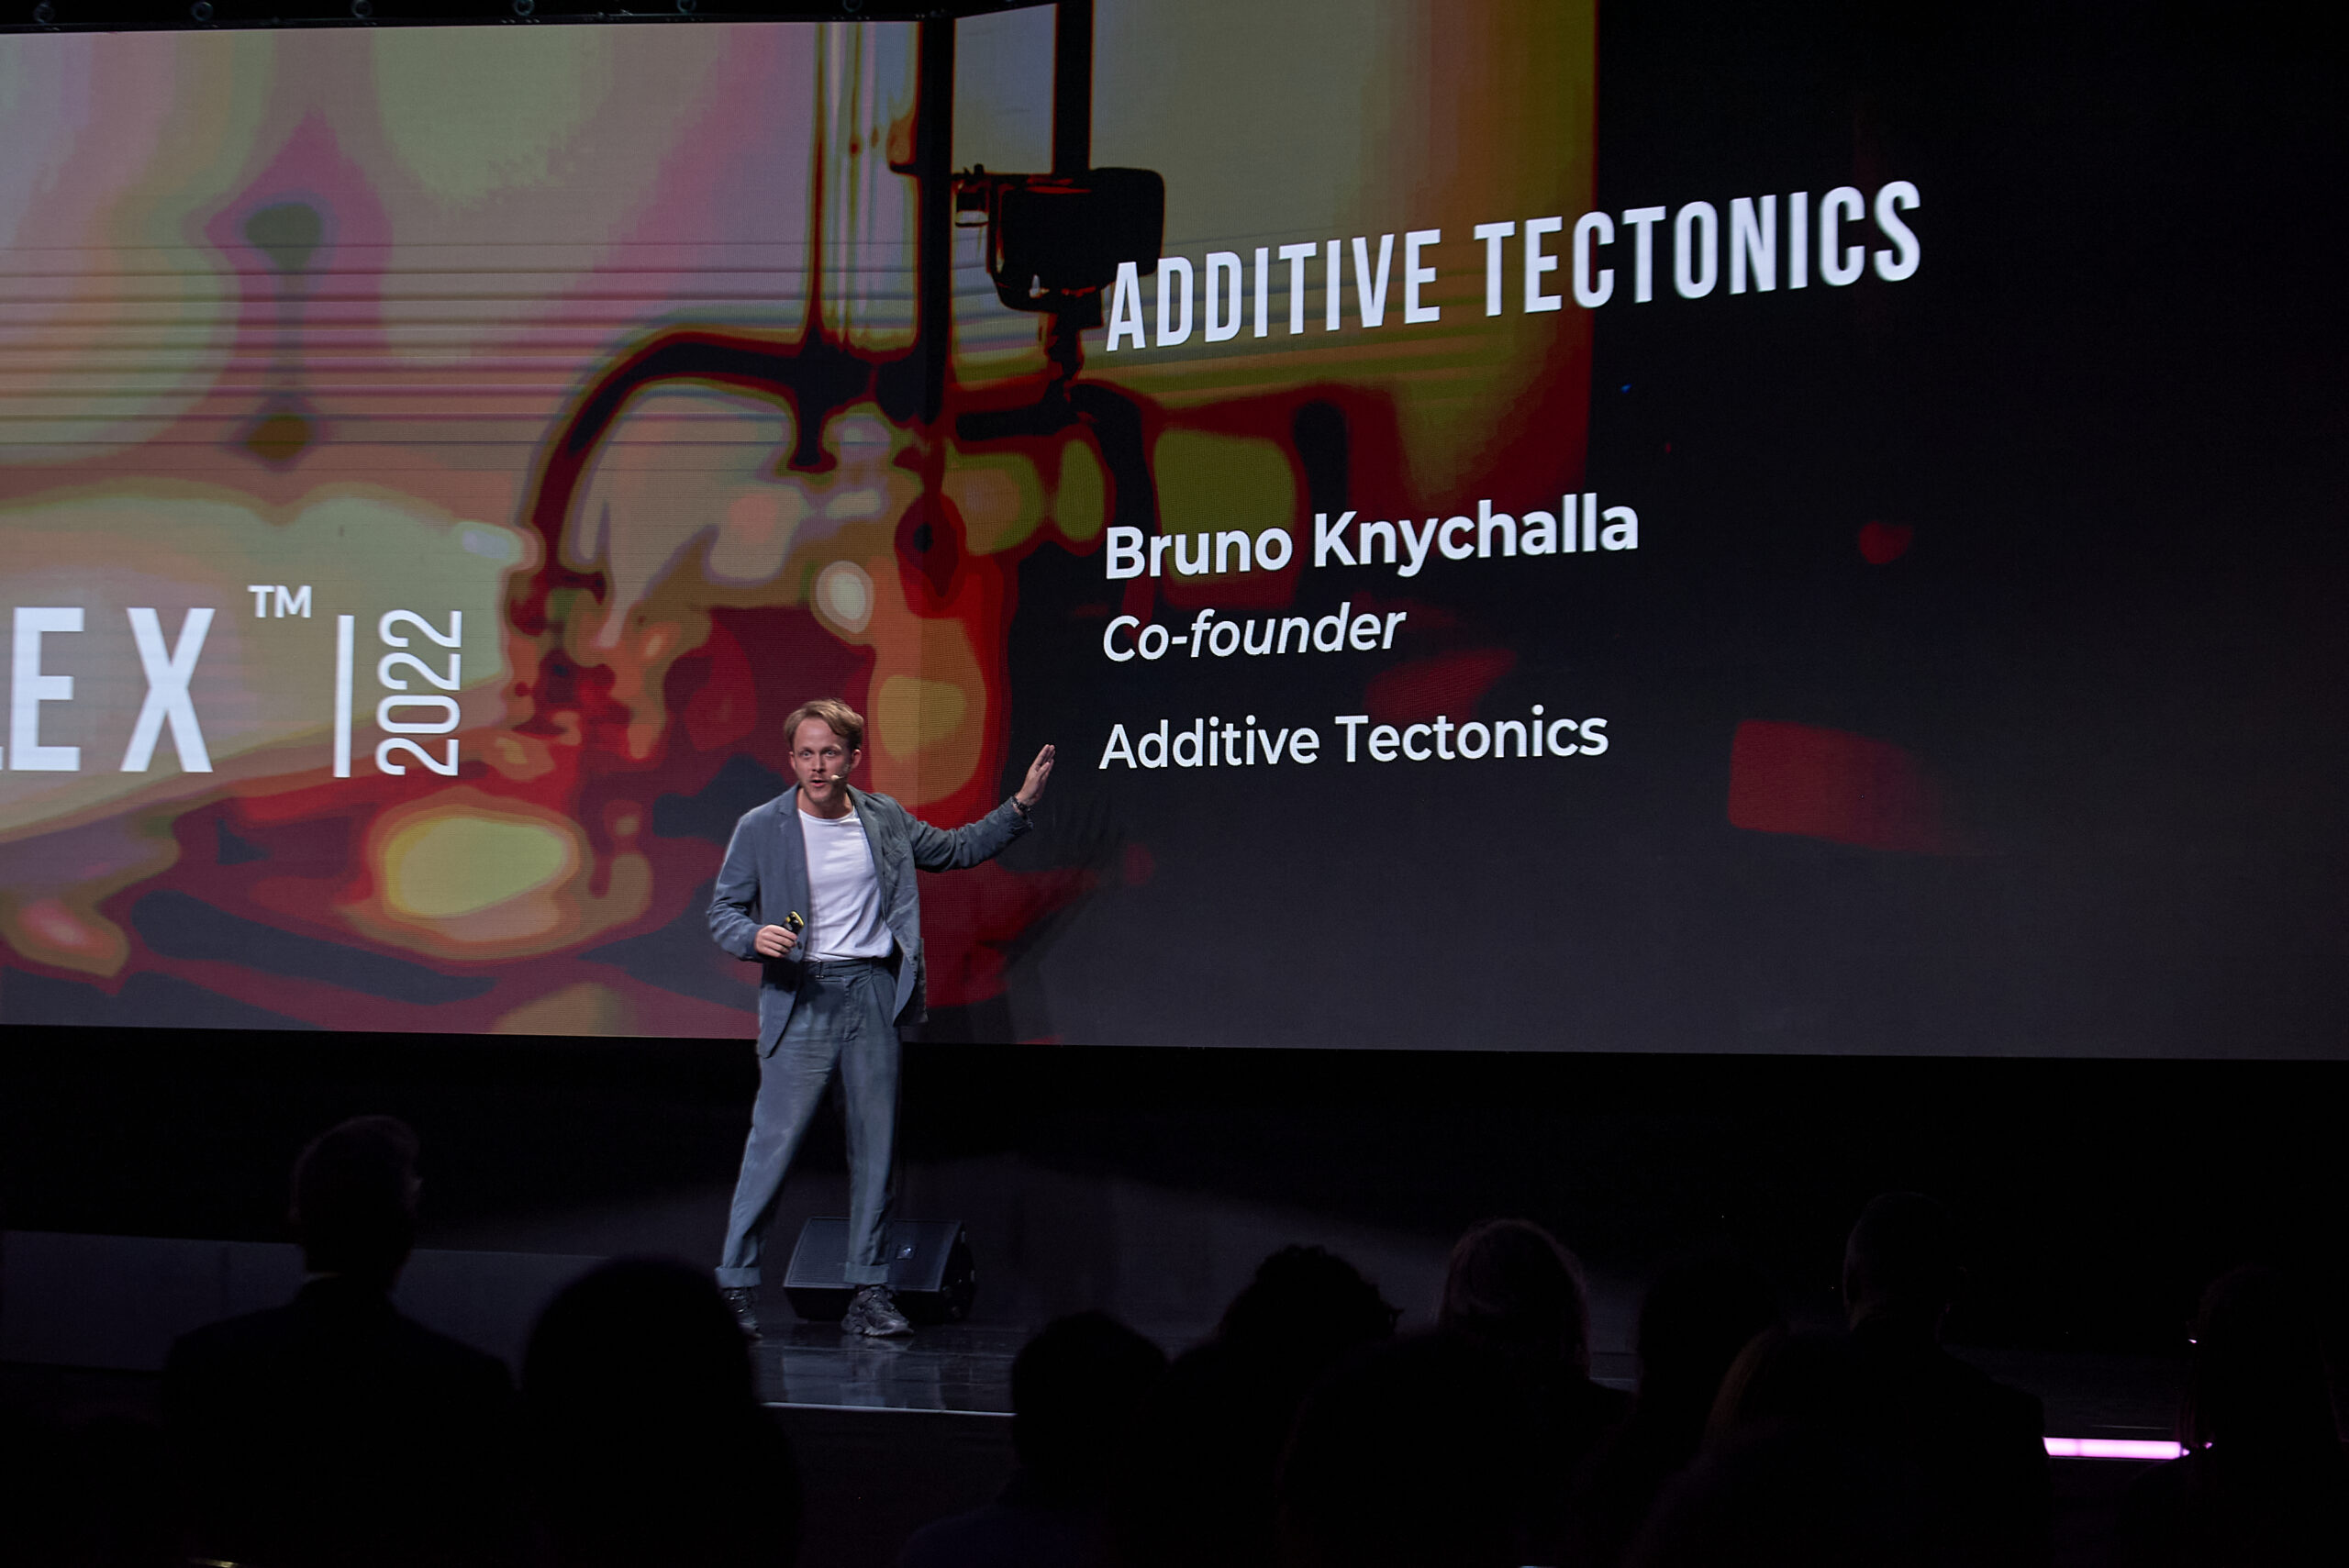 In front of a crowd, Bruno Knychalla presents additive tectonics at Puzzle X Conference 2022 in Barcelona